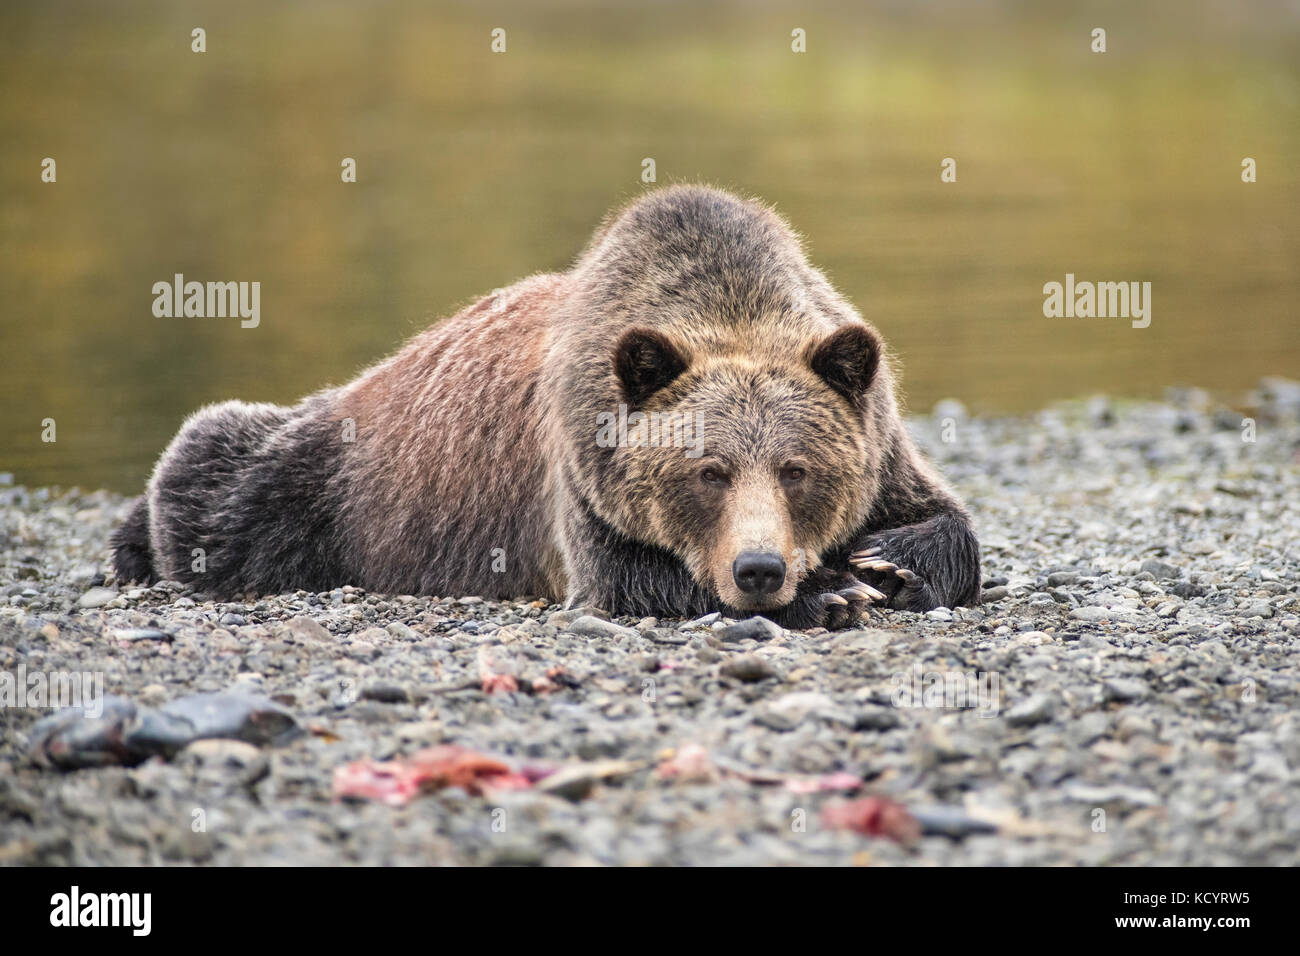 Grizzly Bear (Ursus arctos horribilis), Adult, Female, lying in the gravel river bank of a salmon stream, Central British Columbia, Canada Stock Photo